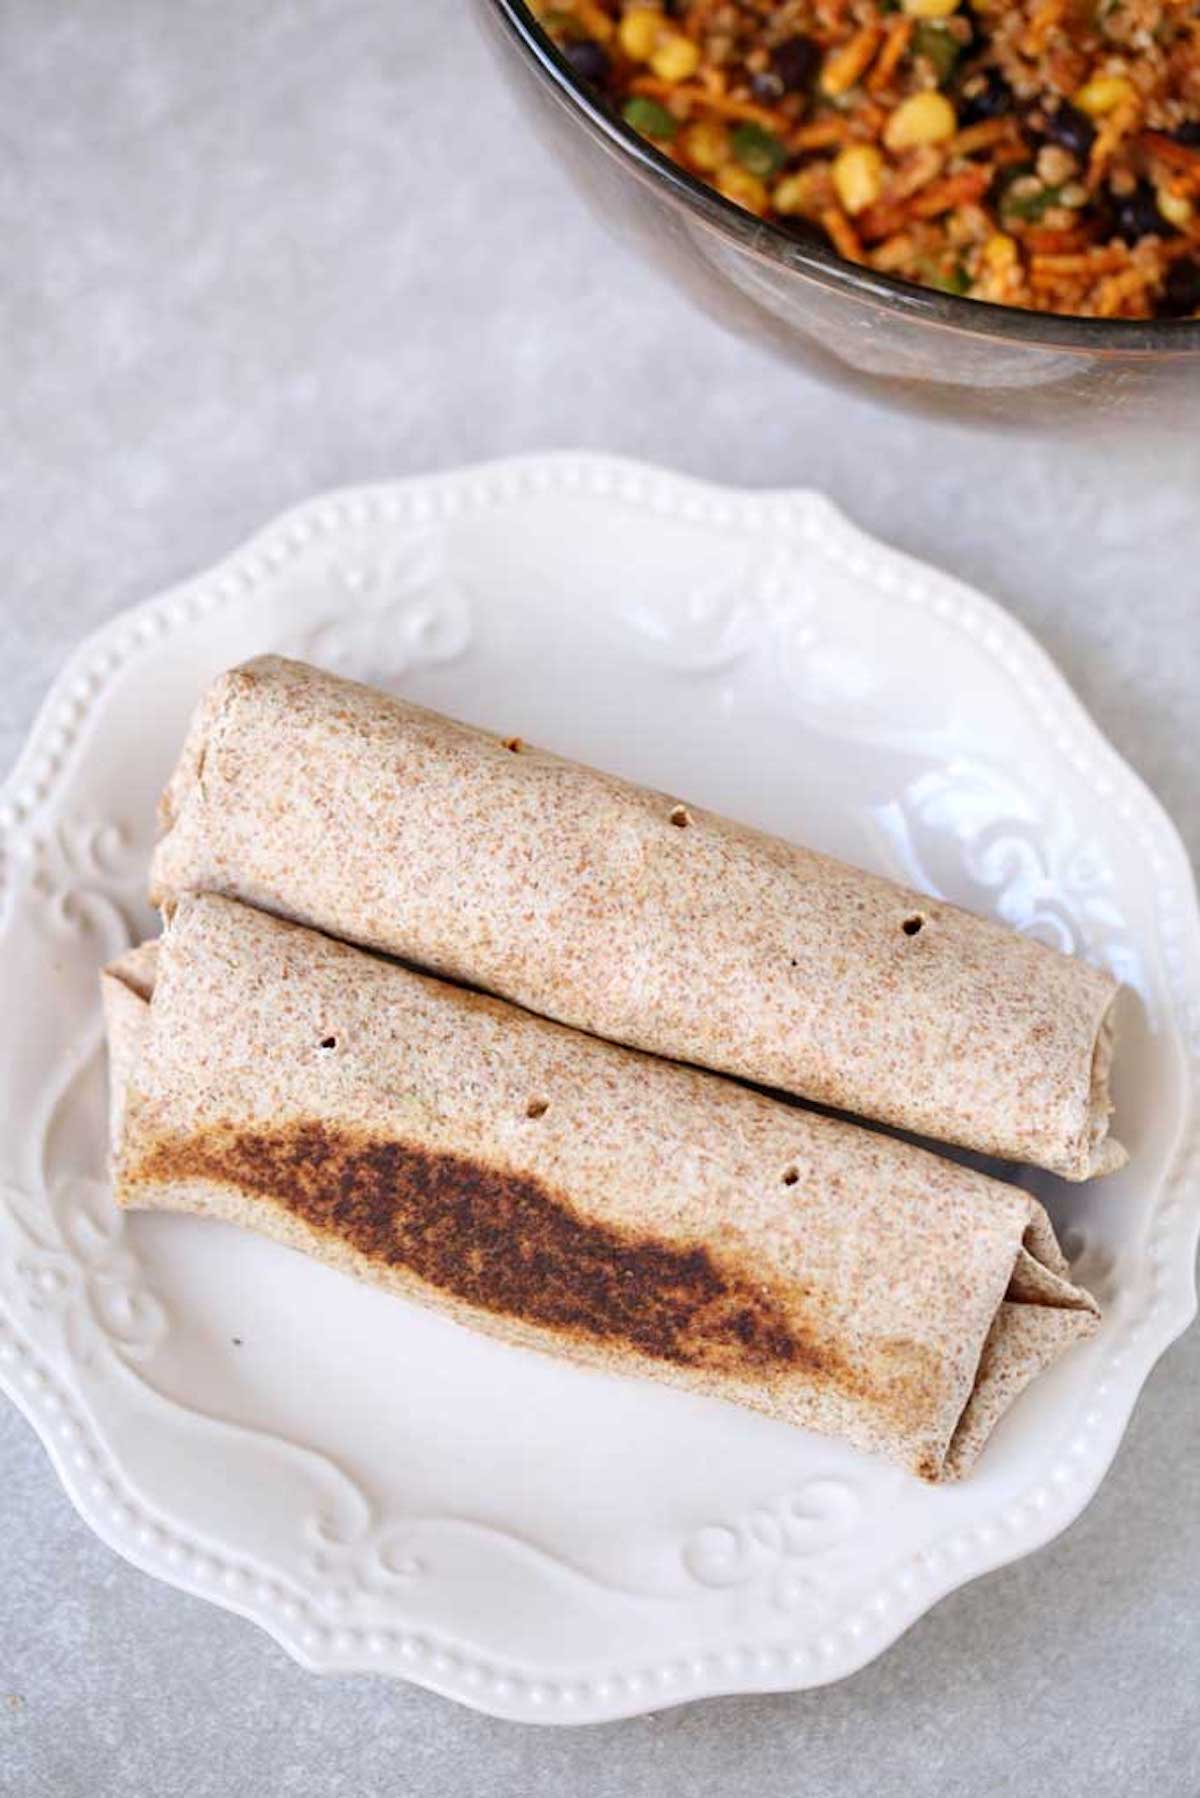 Quinoa burritos on a white plate that haven't yet been cut for serving.